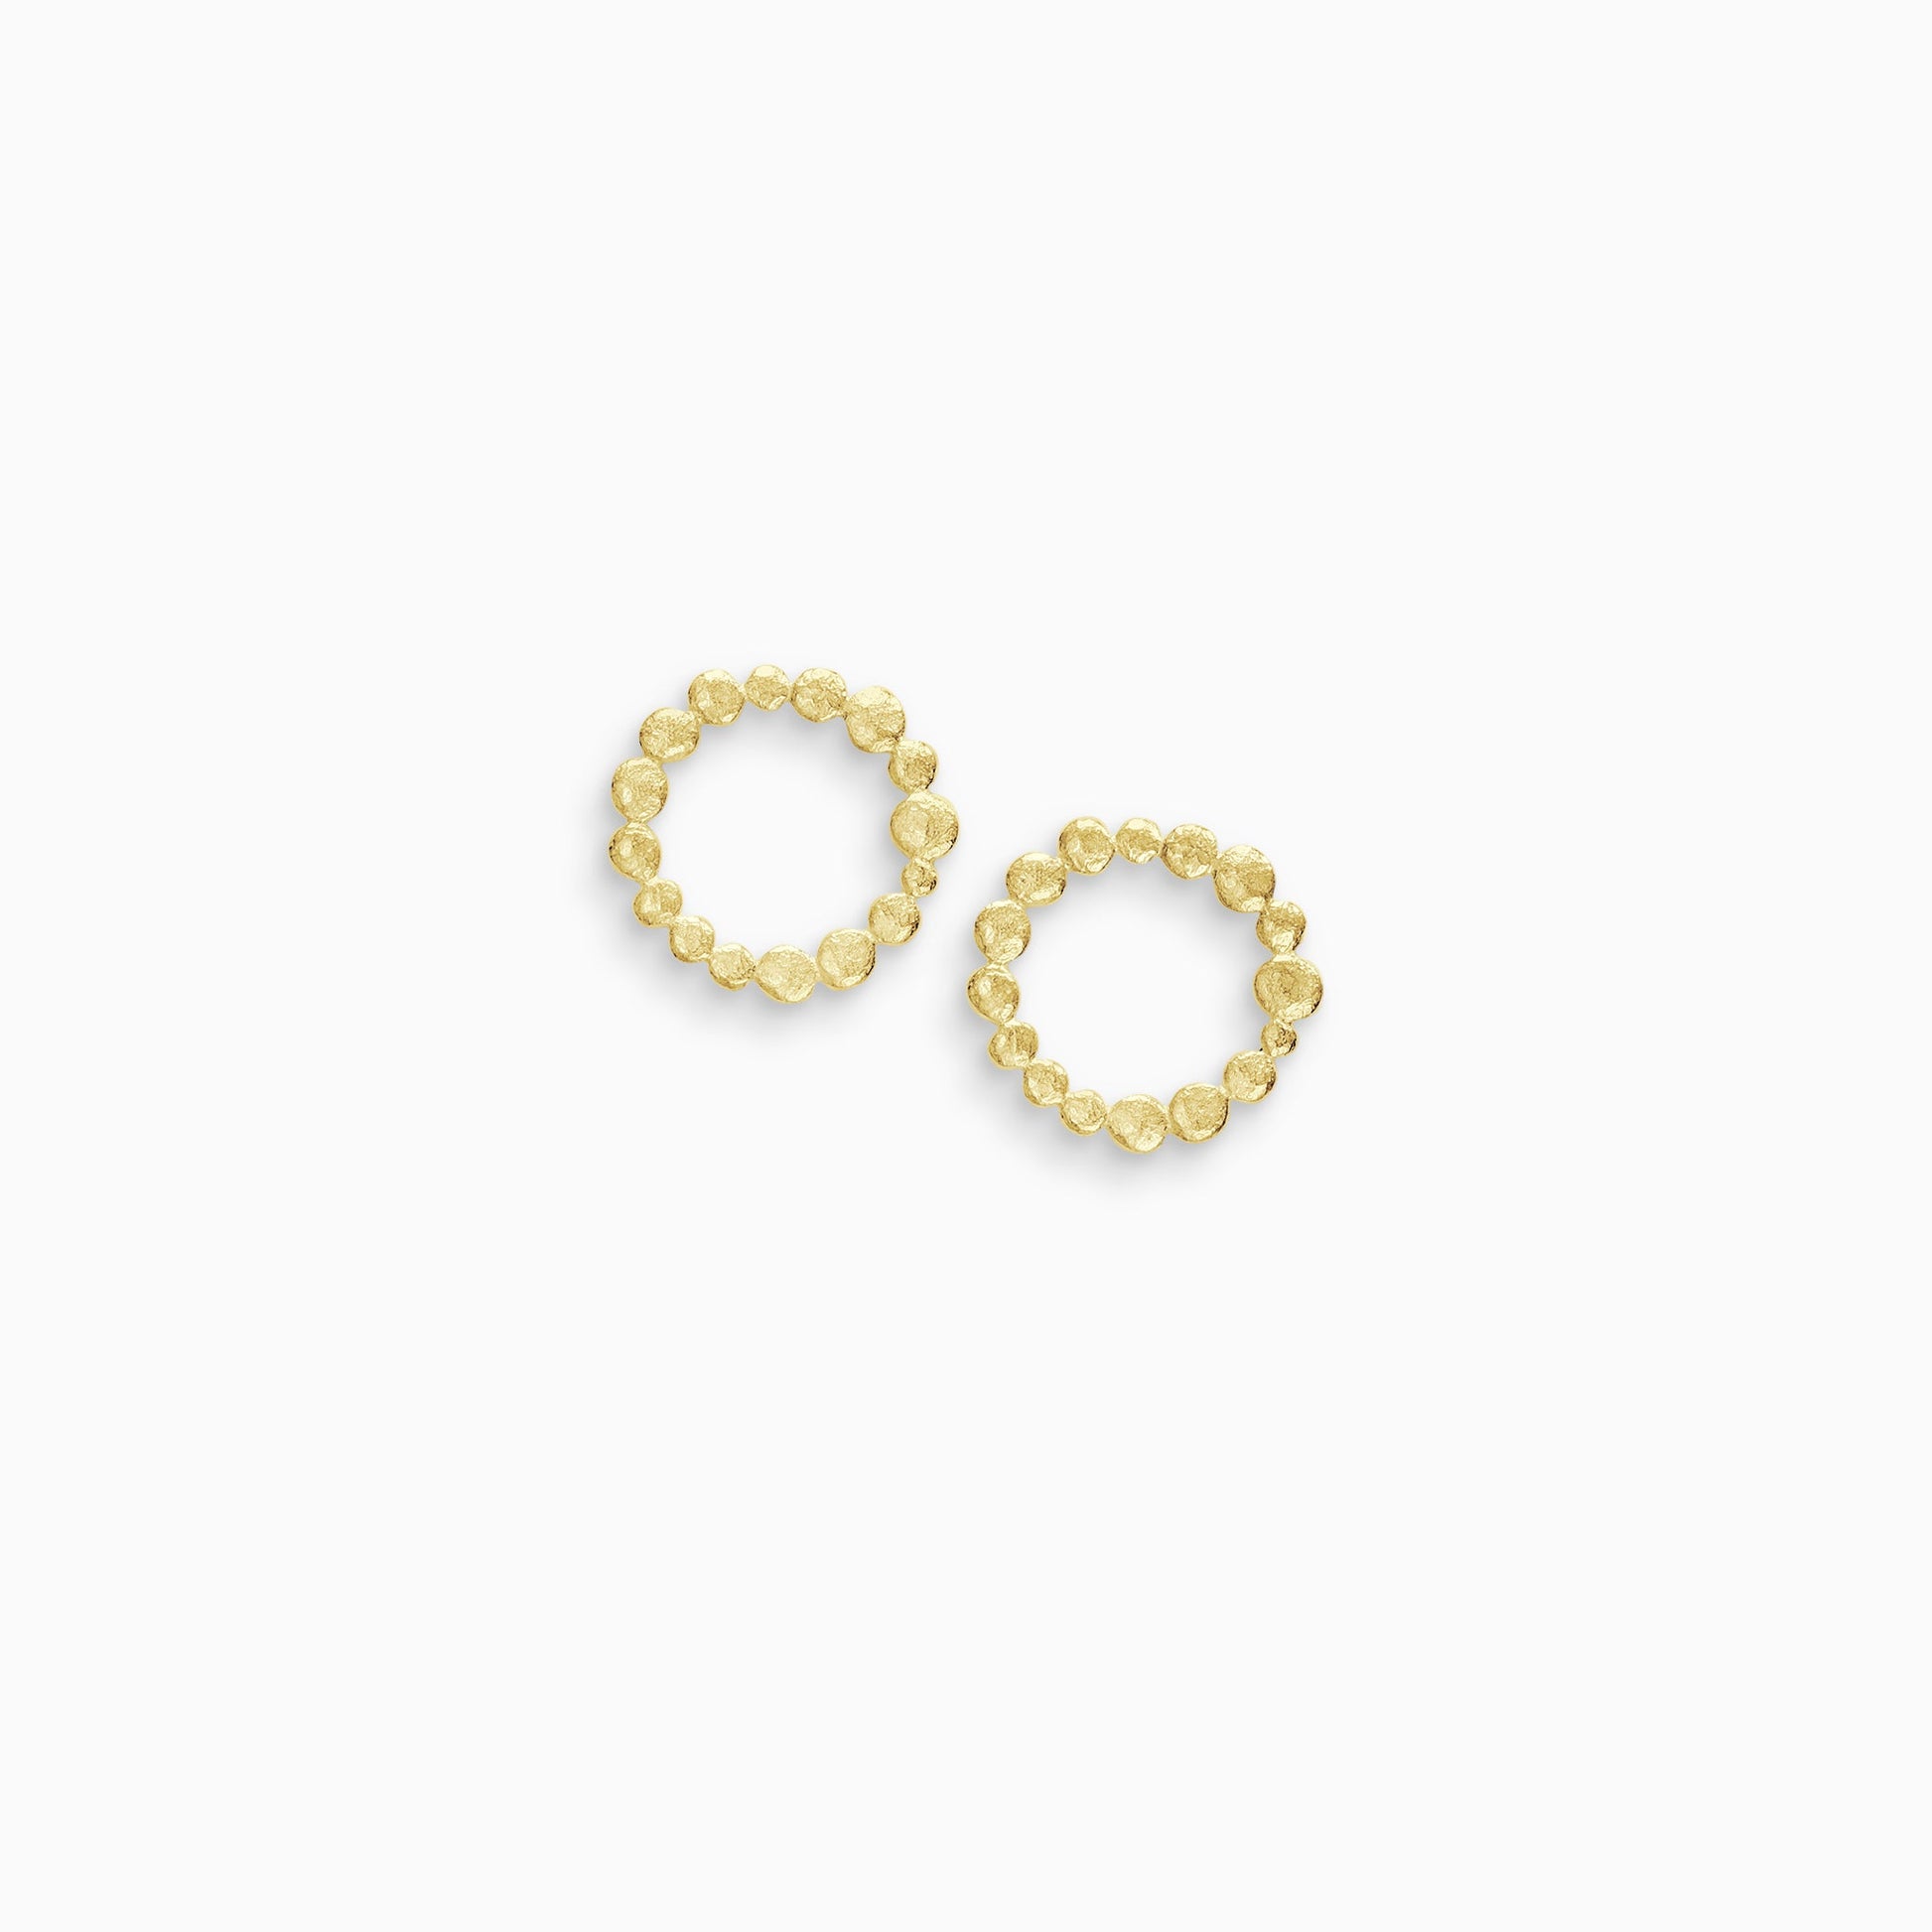 A pair of 18ct Fairtrade yellow gold small earrings made of tiny undulating textured and connected dots forming a closed circle. 25mm outside diameter 